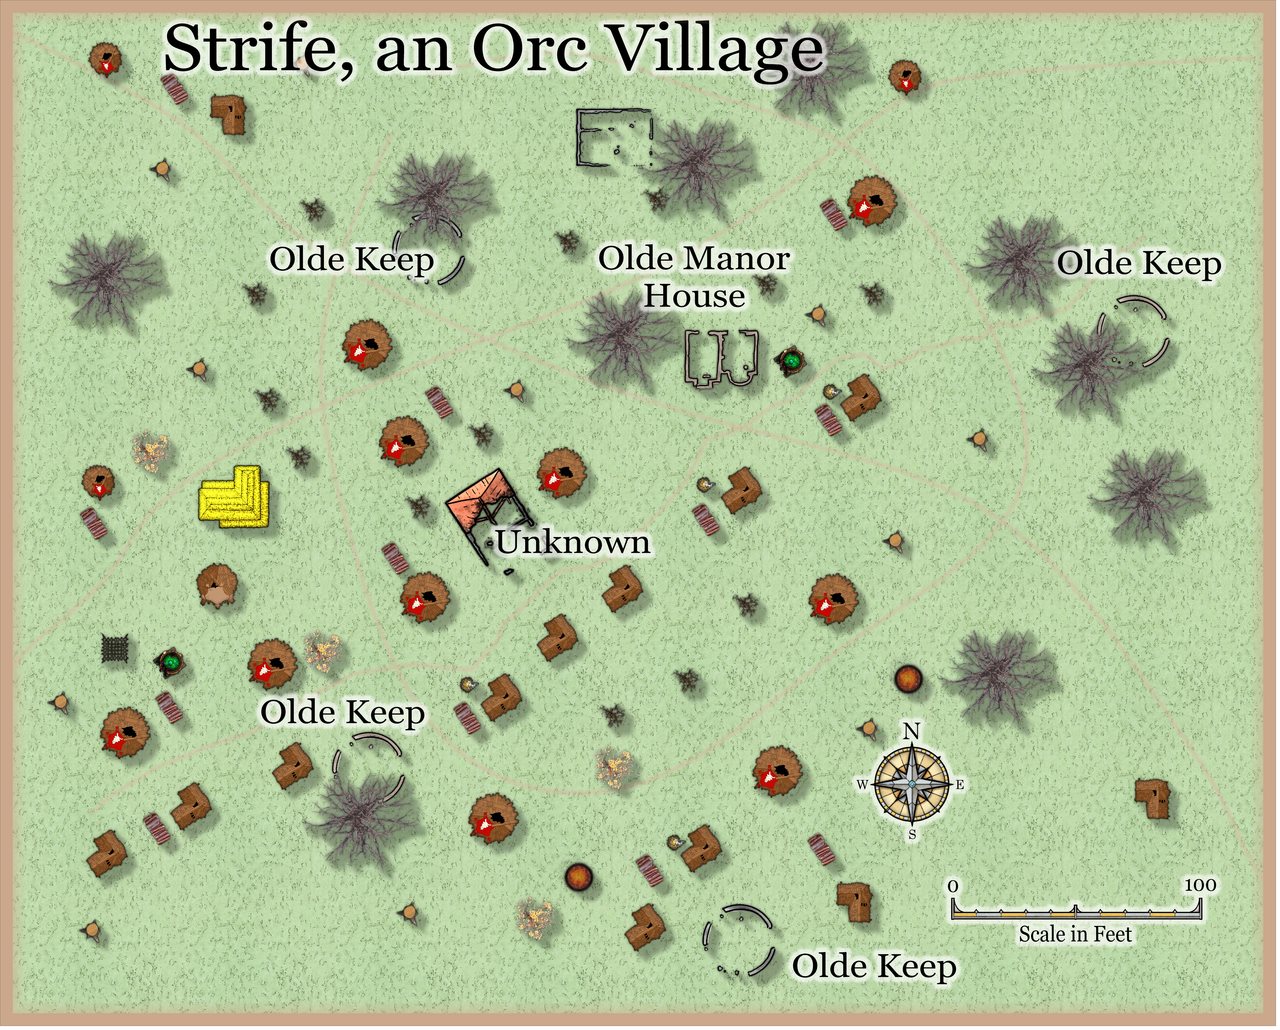 Nibirum Map: orc village strife by JimP